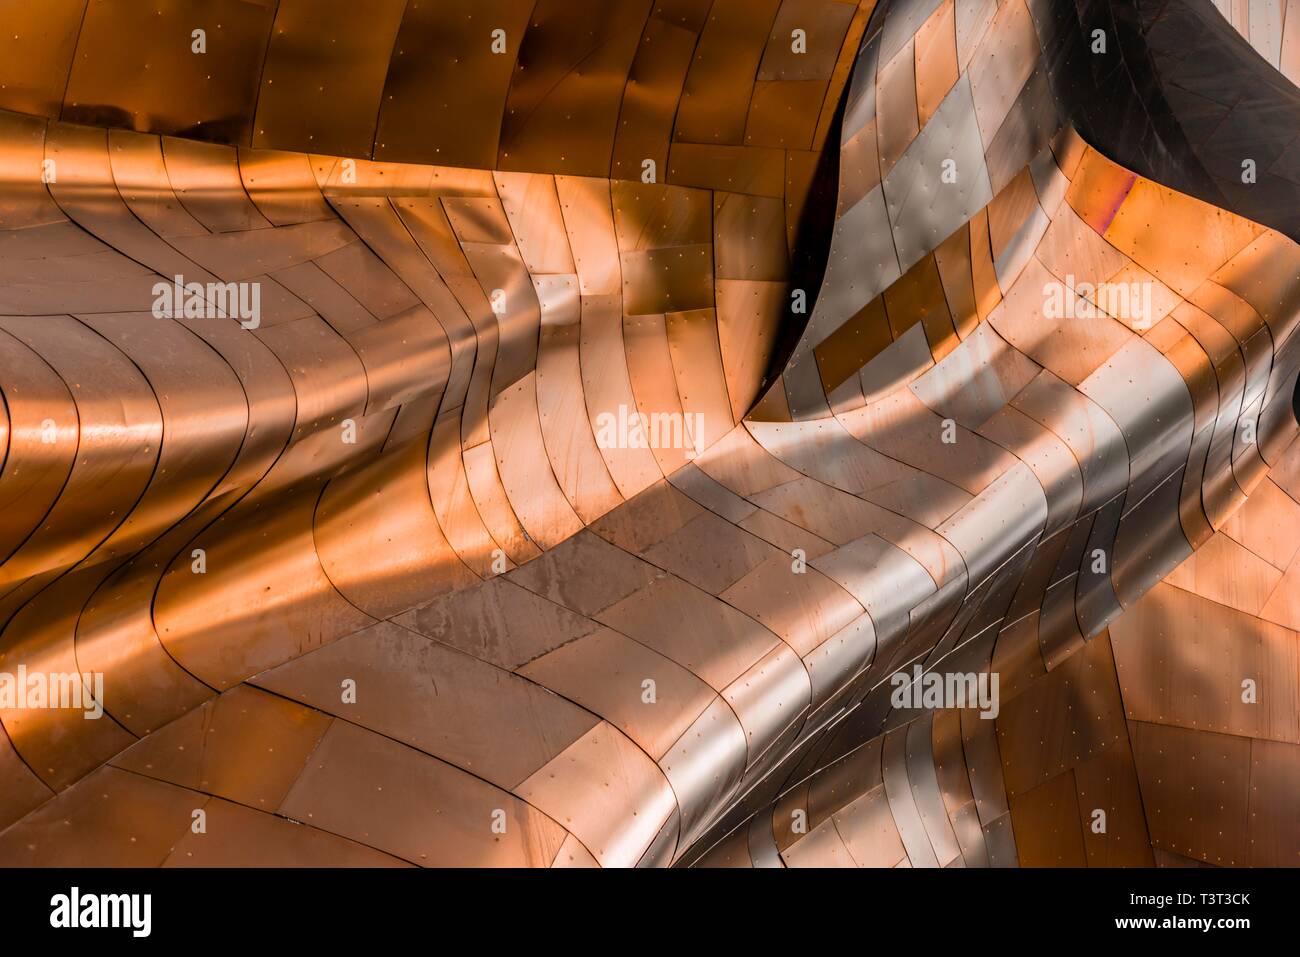 Copper coloured curved facade of the Museum of Pop Culture, MoPOP, detail, modern architecture, architect Frank Gehry, Washington, USA Stock Photo